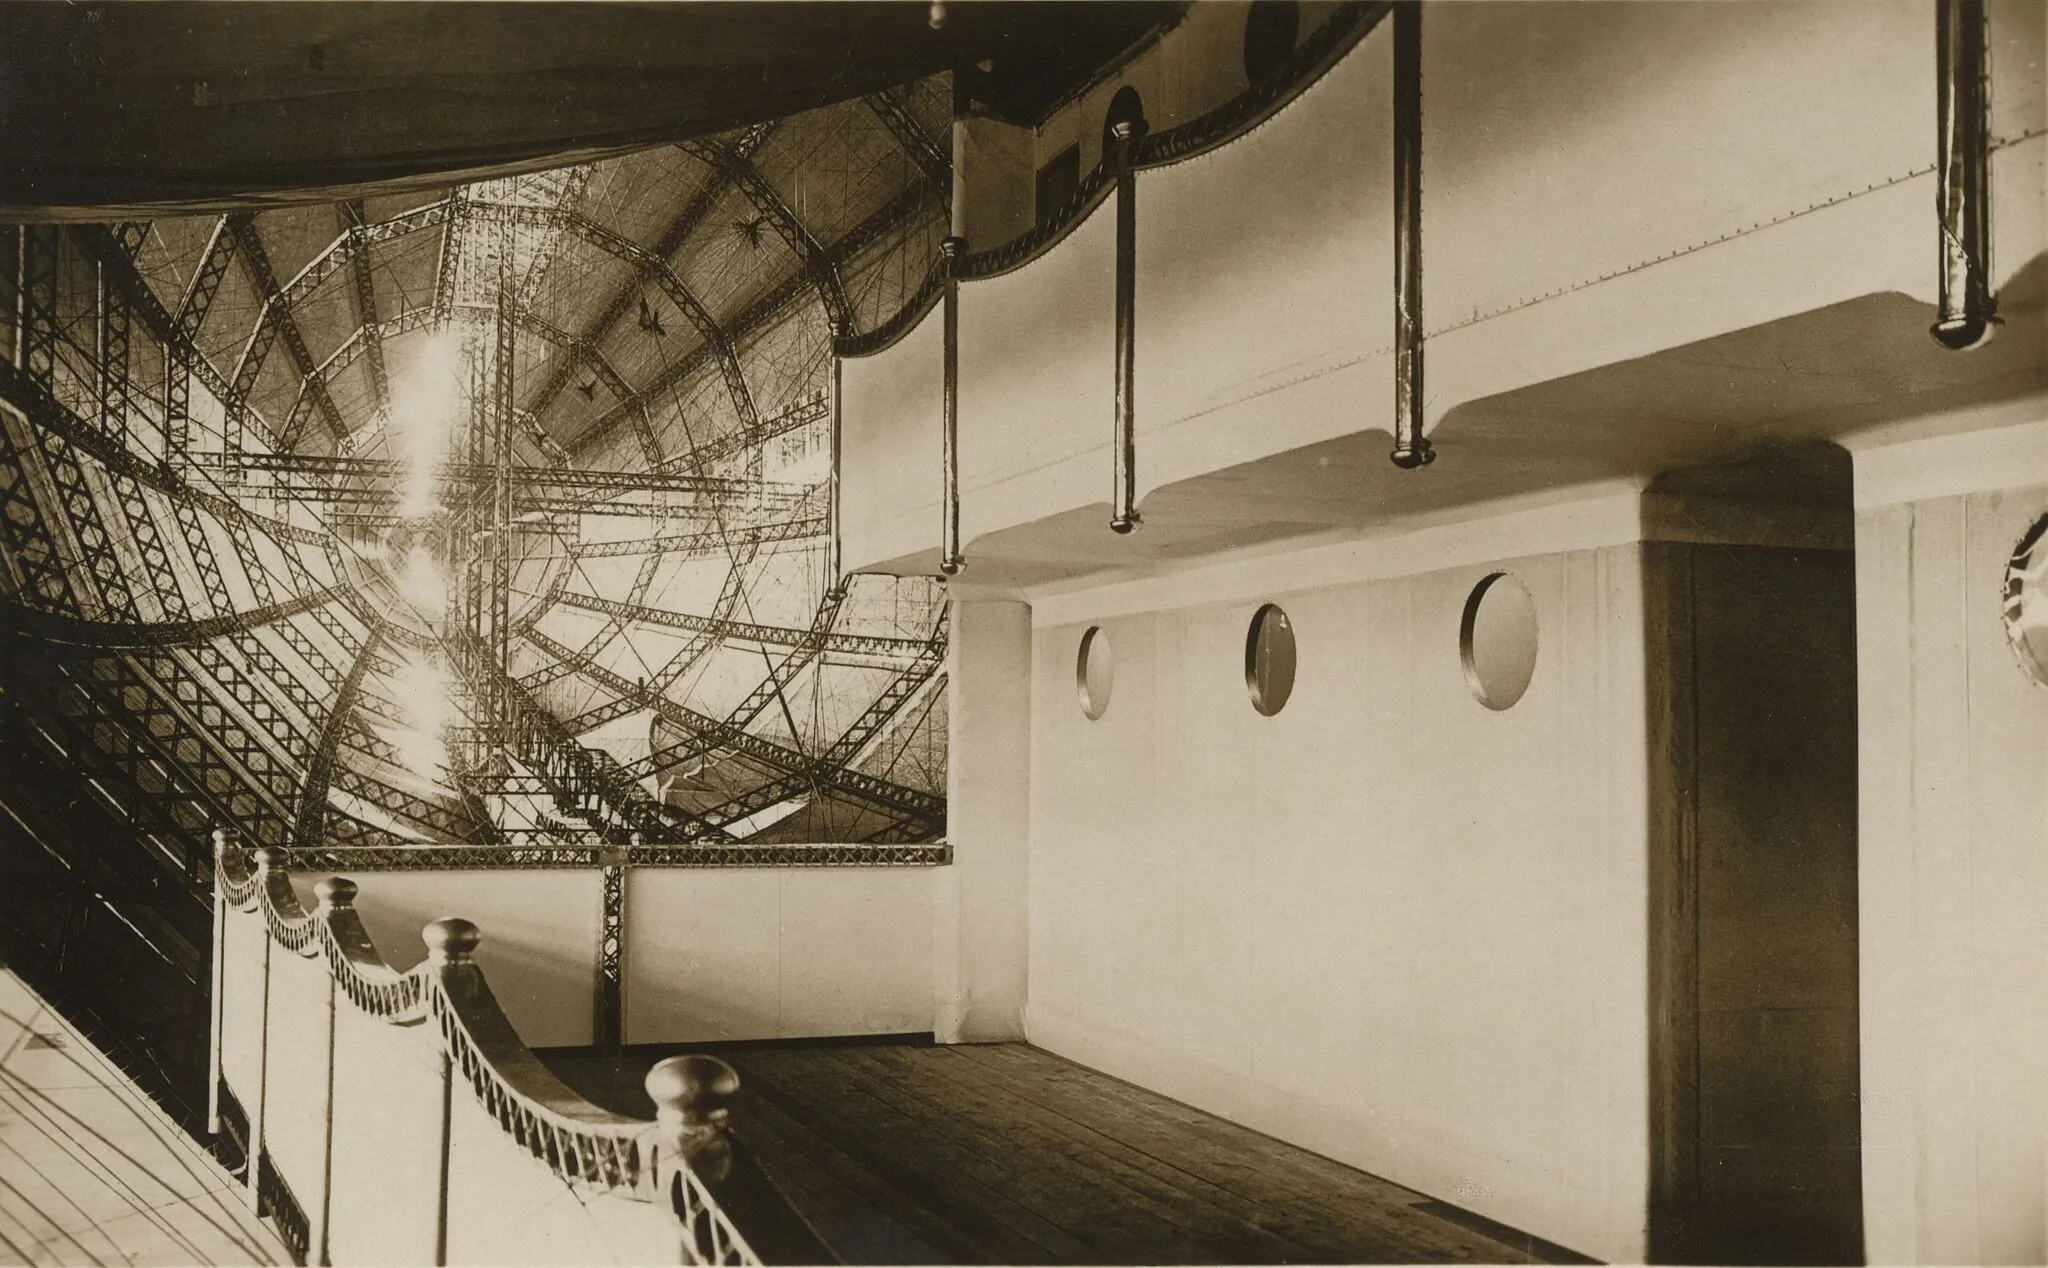 Photo showing: A view from the passenger lounge of the airship.
(Why not try searching our East Riding of Yorkshire Map for more historic images?
www.flickr.com/photos/erarchives/map )
(Copyright) We're happy for you to share this digital image within the spirit of Creative Commons.
Please cite 'http://www2.eastriding.gov.uk/leisure/archives-family-and-local-history/ ' when reusing.
Certain restrictions on high quality reproductions and commercial use of the original physical version apply. If unsure please email archives.service@eastriding.gov.uk